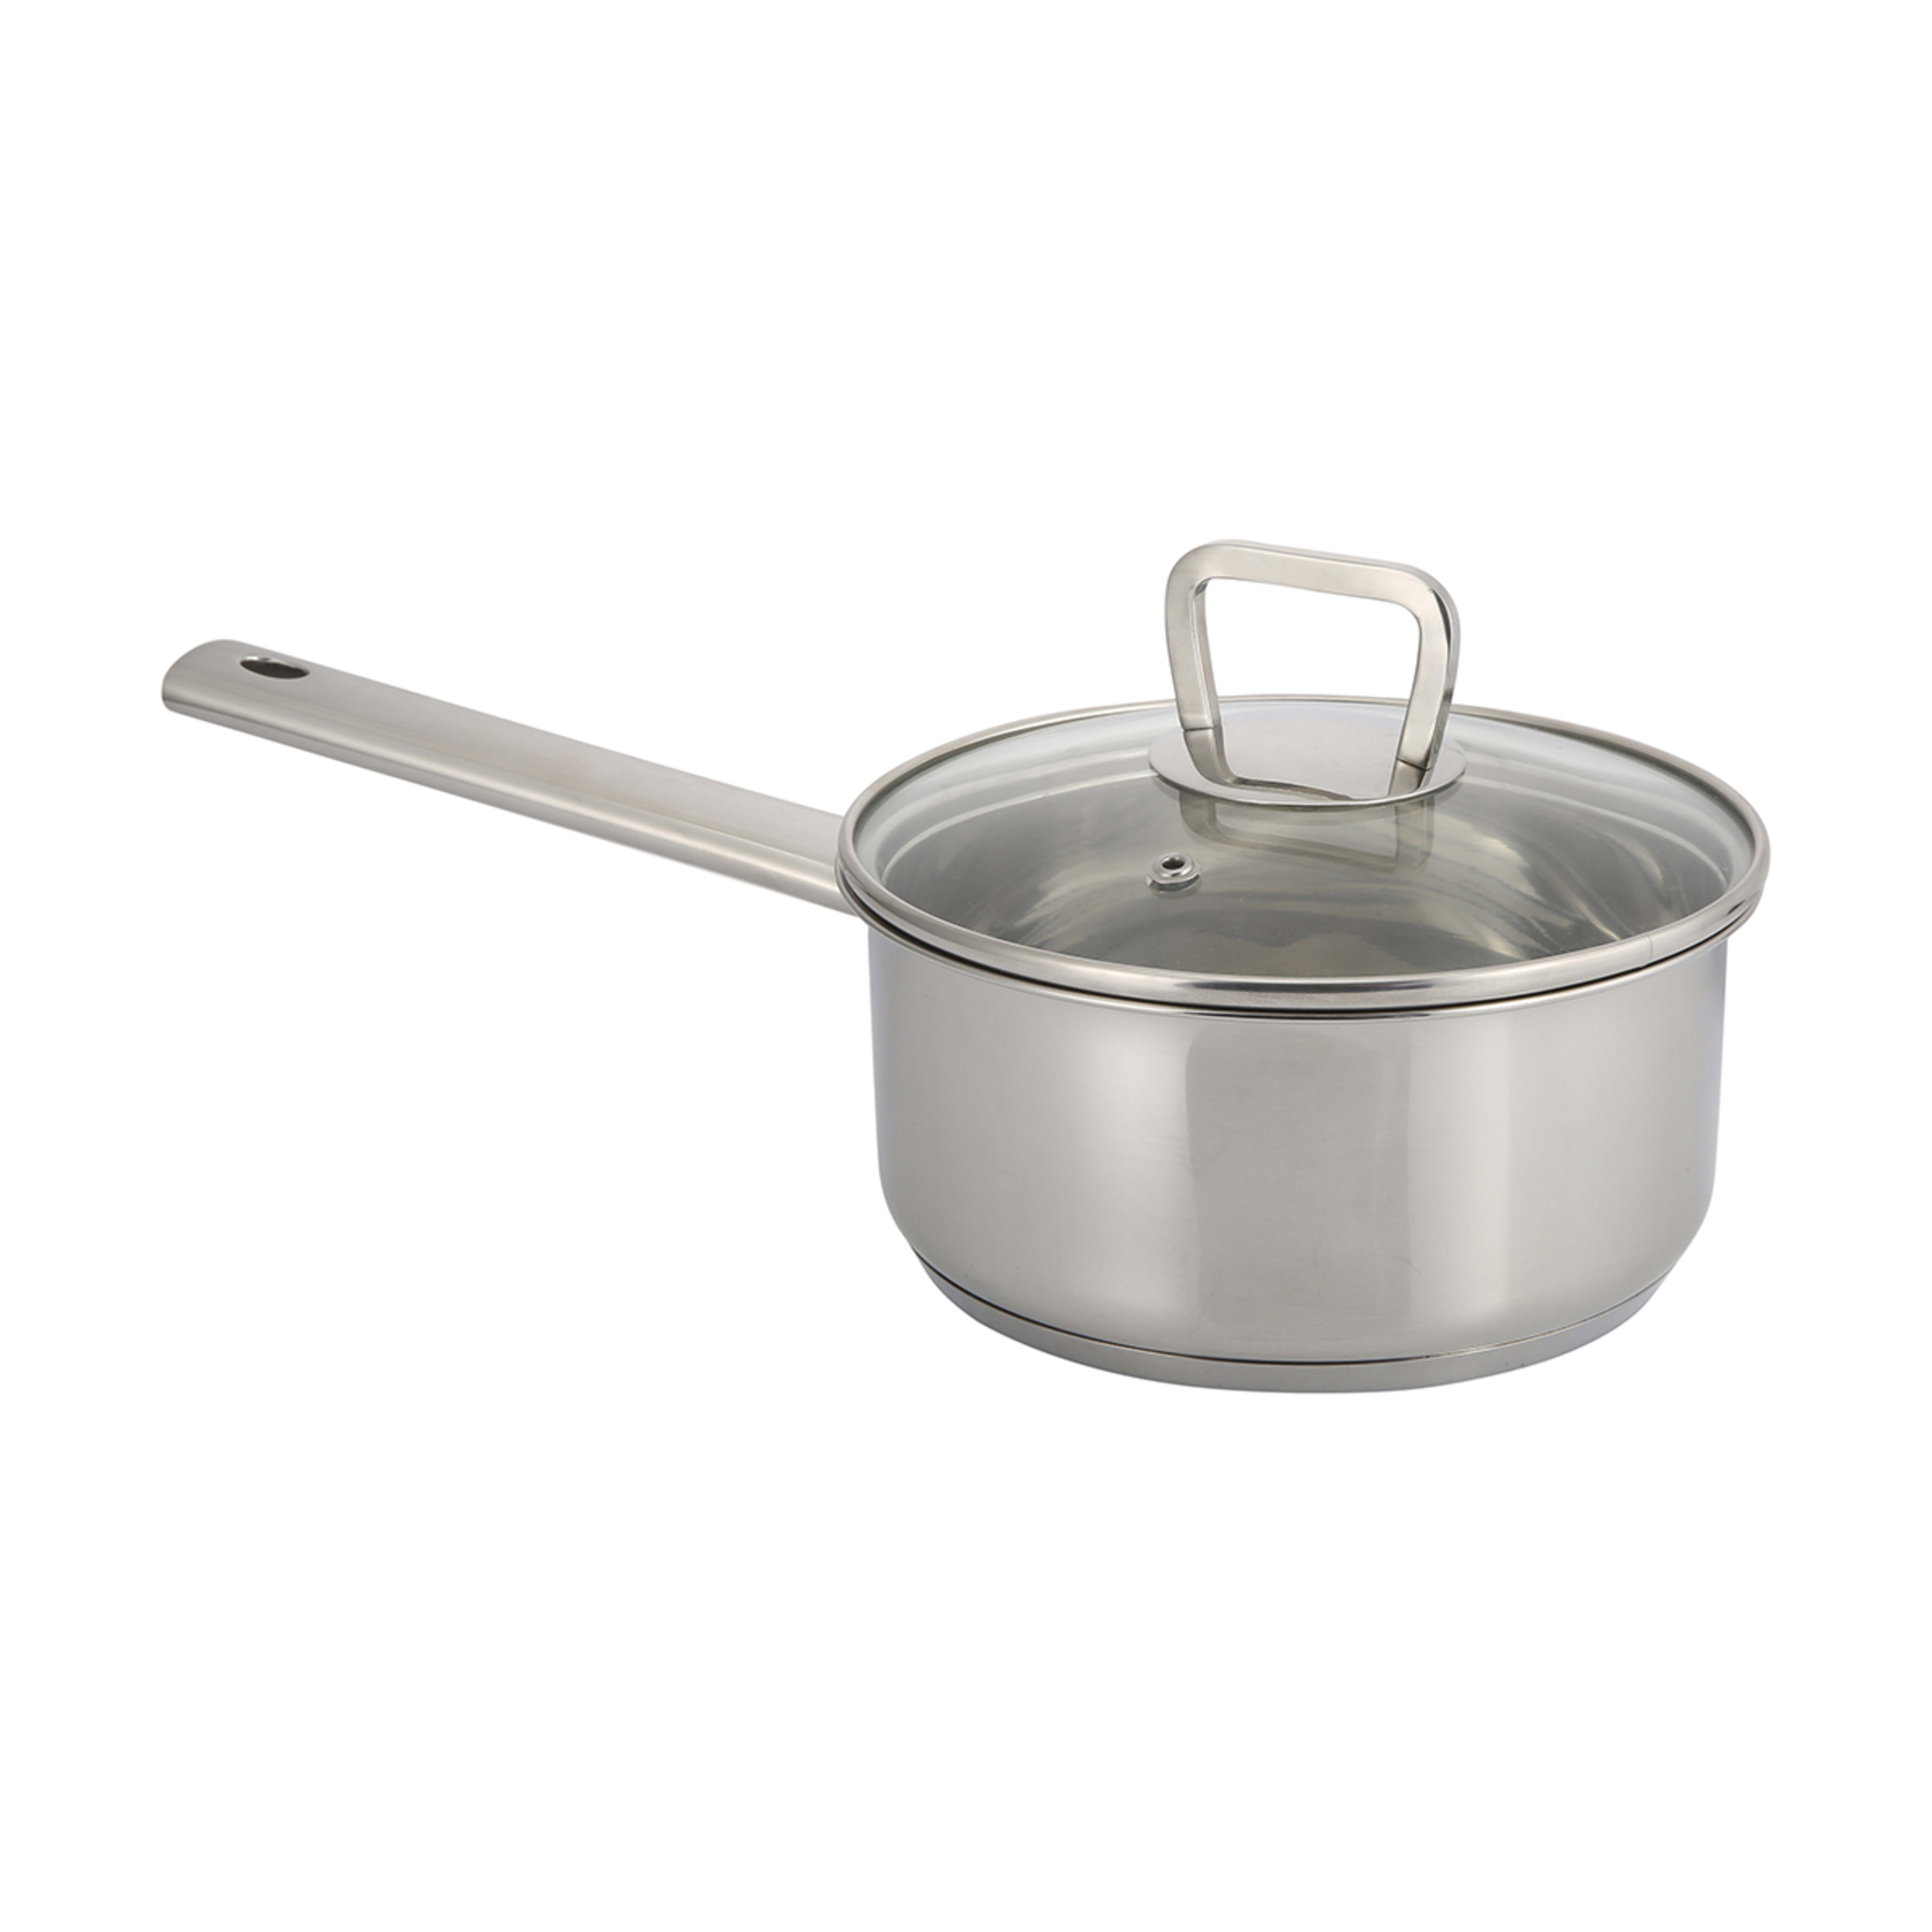 16cm Stainless Steel with Encapsulated Base Saucepan